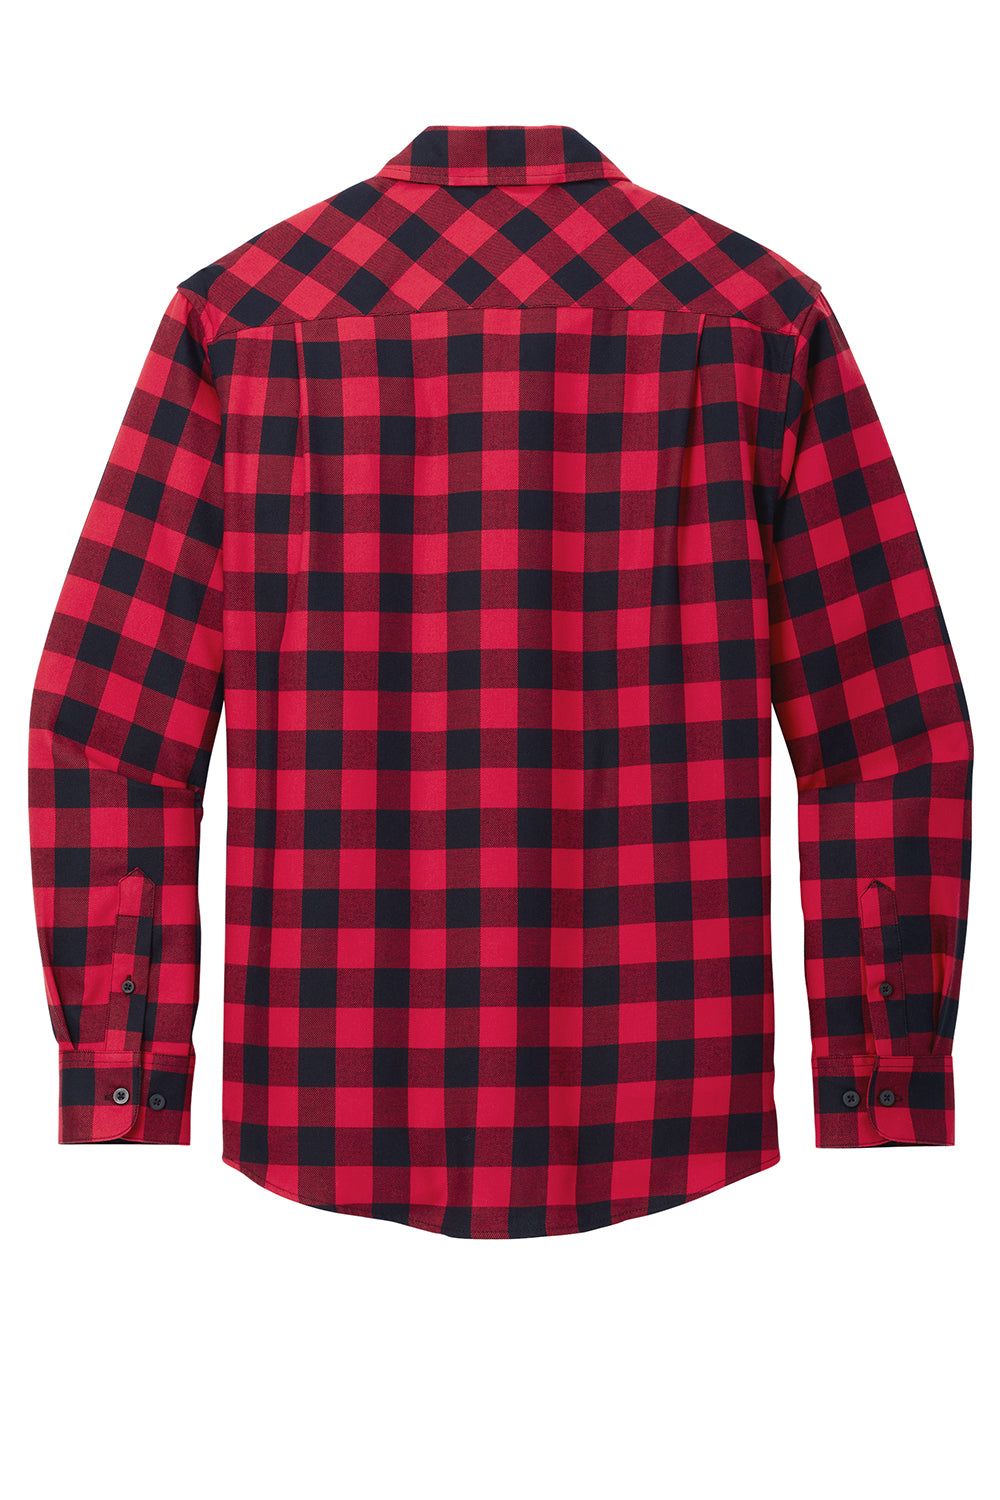 Port Authority W668 Mens Flannel Long Sleeve Button Down Shirt w/ Double Pockets Red/Black Buffalo Flat Back